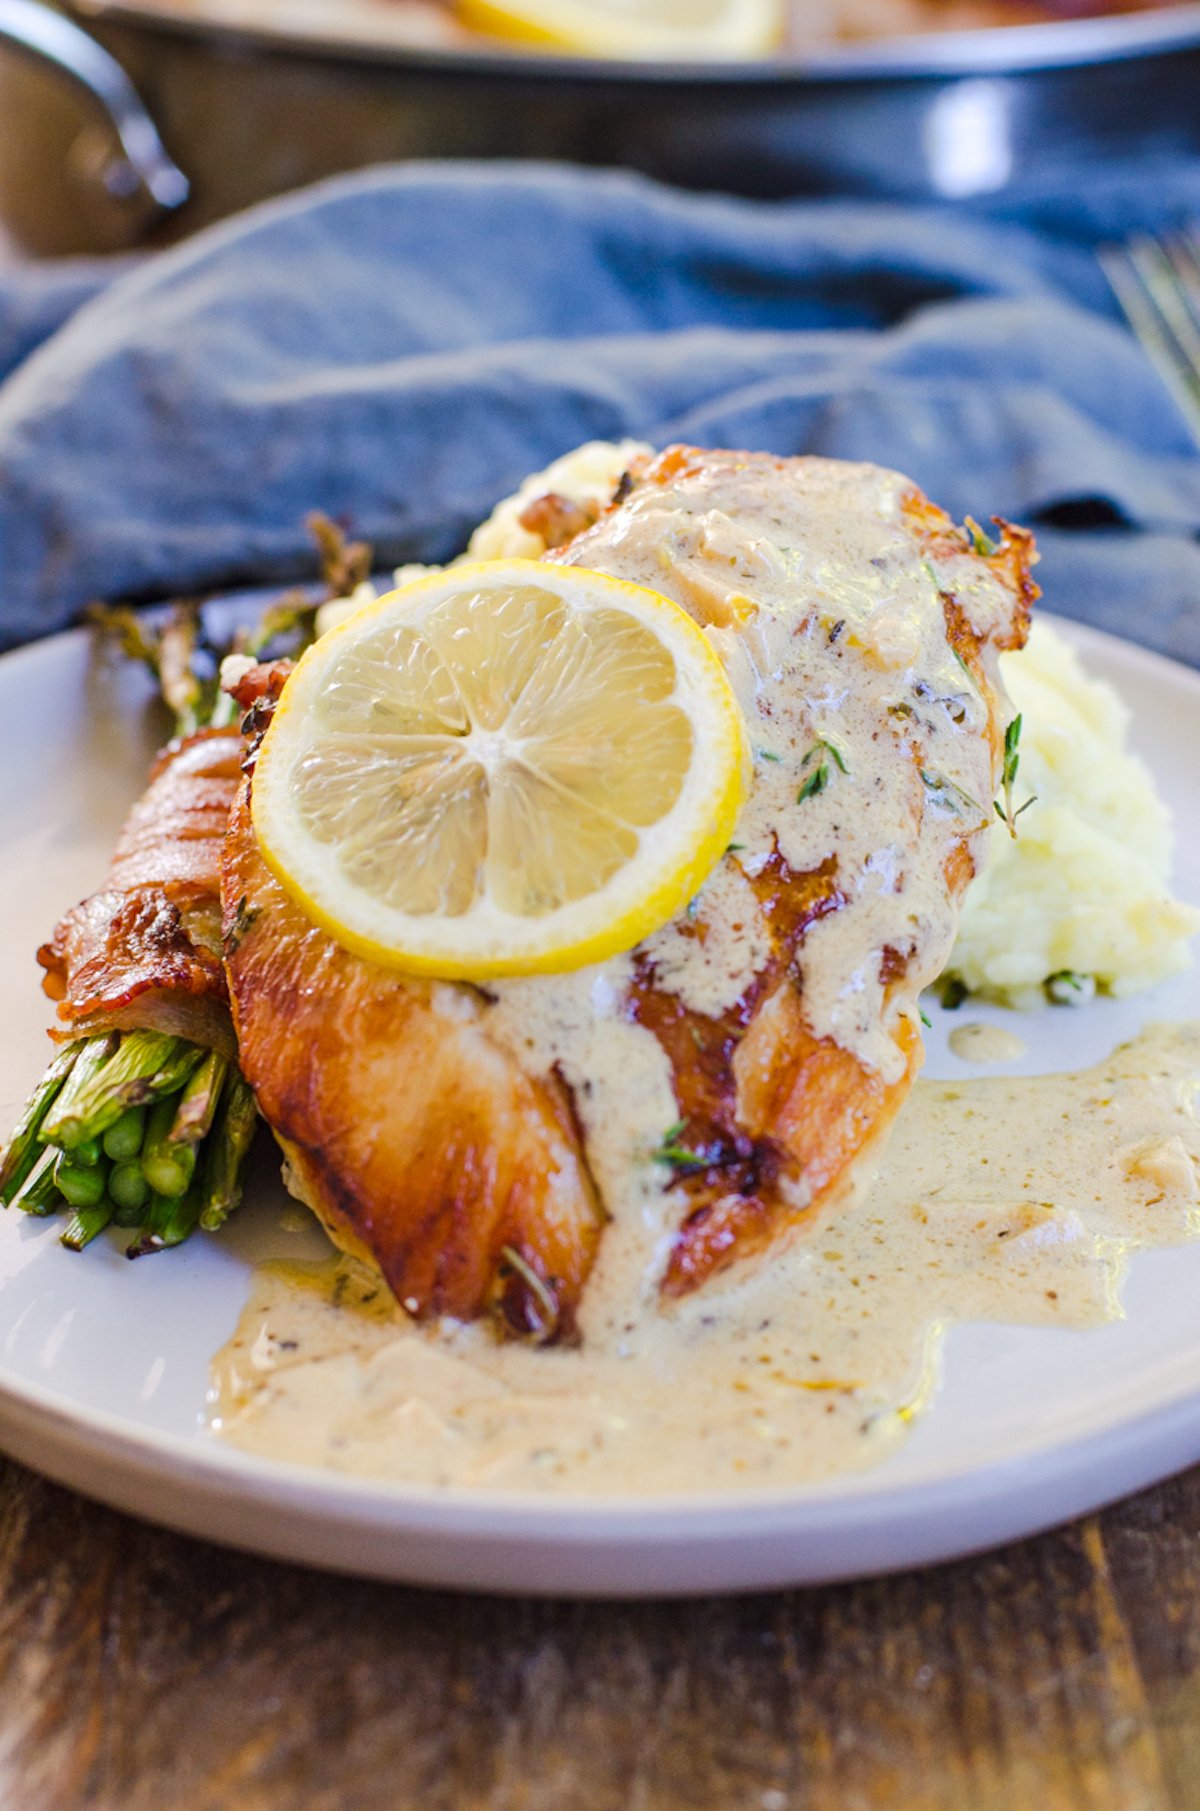 Herbs de Provence chicken with lemon cream sauce next to asparagus and mashed potatoes.